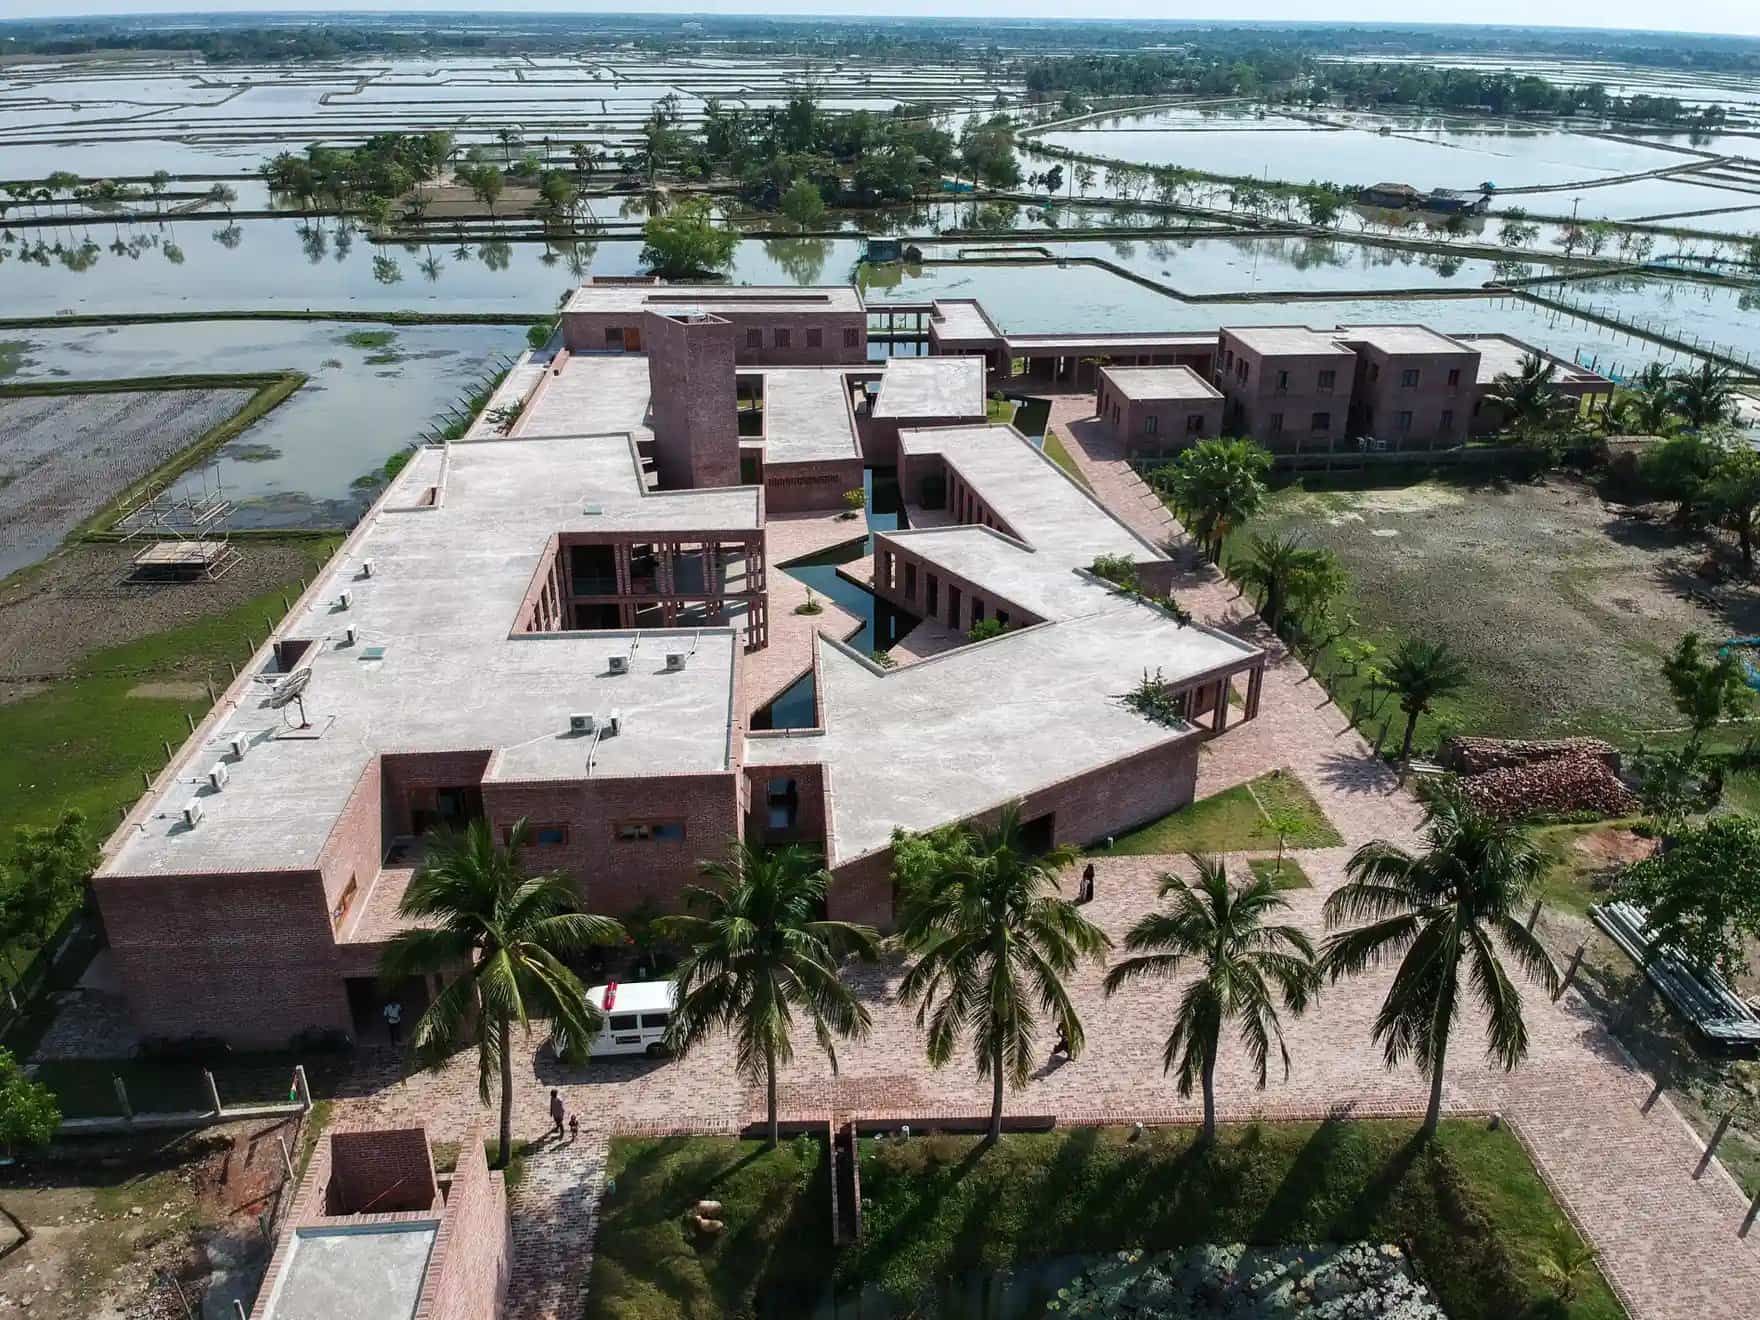 An aerial view of the Friendship Hospital seen against the surrounding rice fields